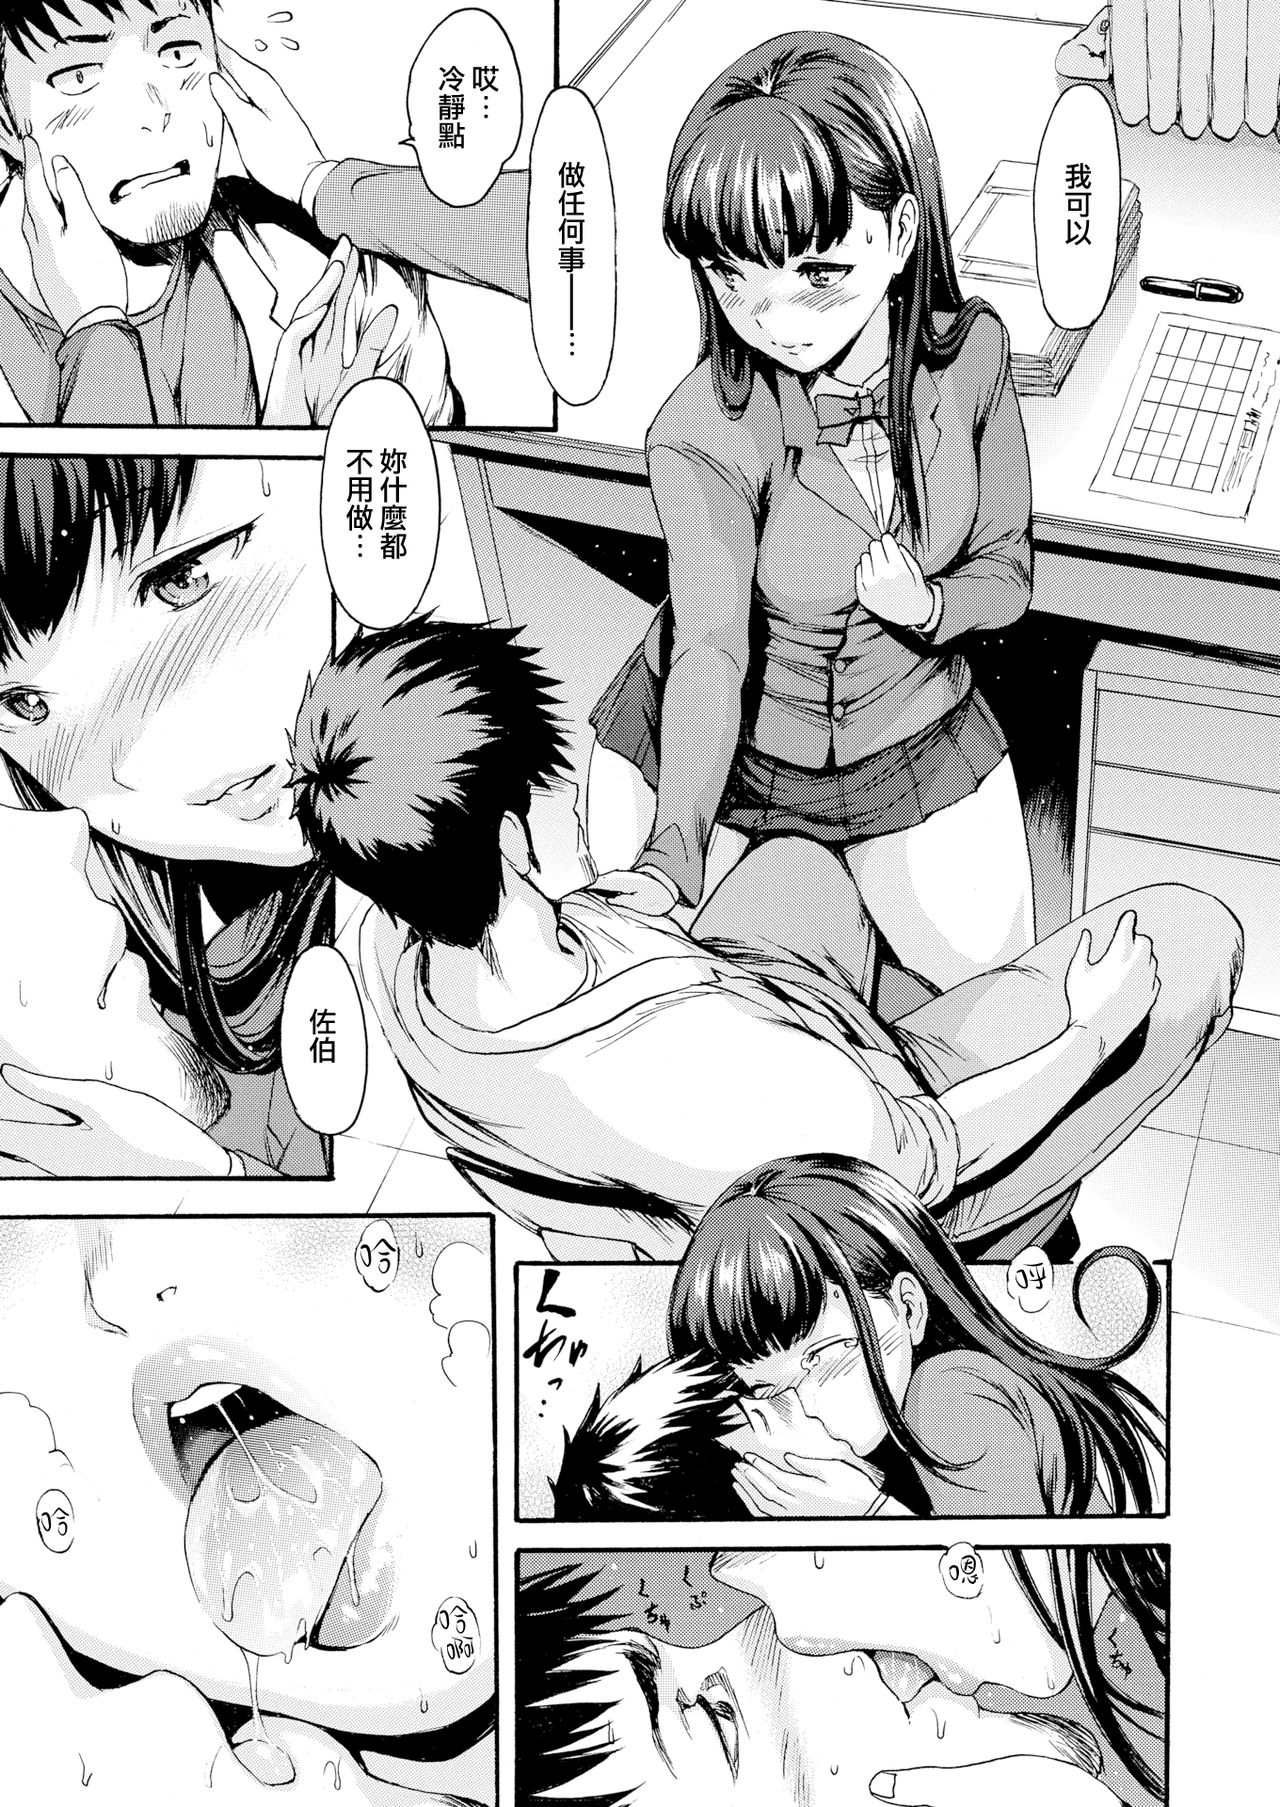 [E-Musu Aki] Dokkiri Mate - Do You Wanna SEX With Younger Pussy? (COMIC-X-EROS #61) [Chinese] [無邪気漢化組] [Digital] page 13 full